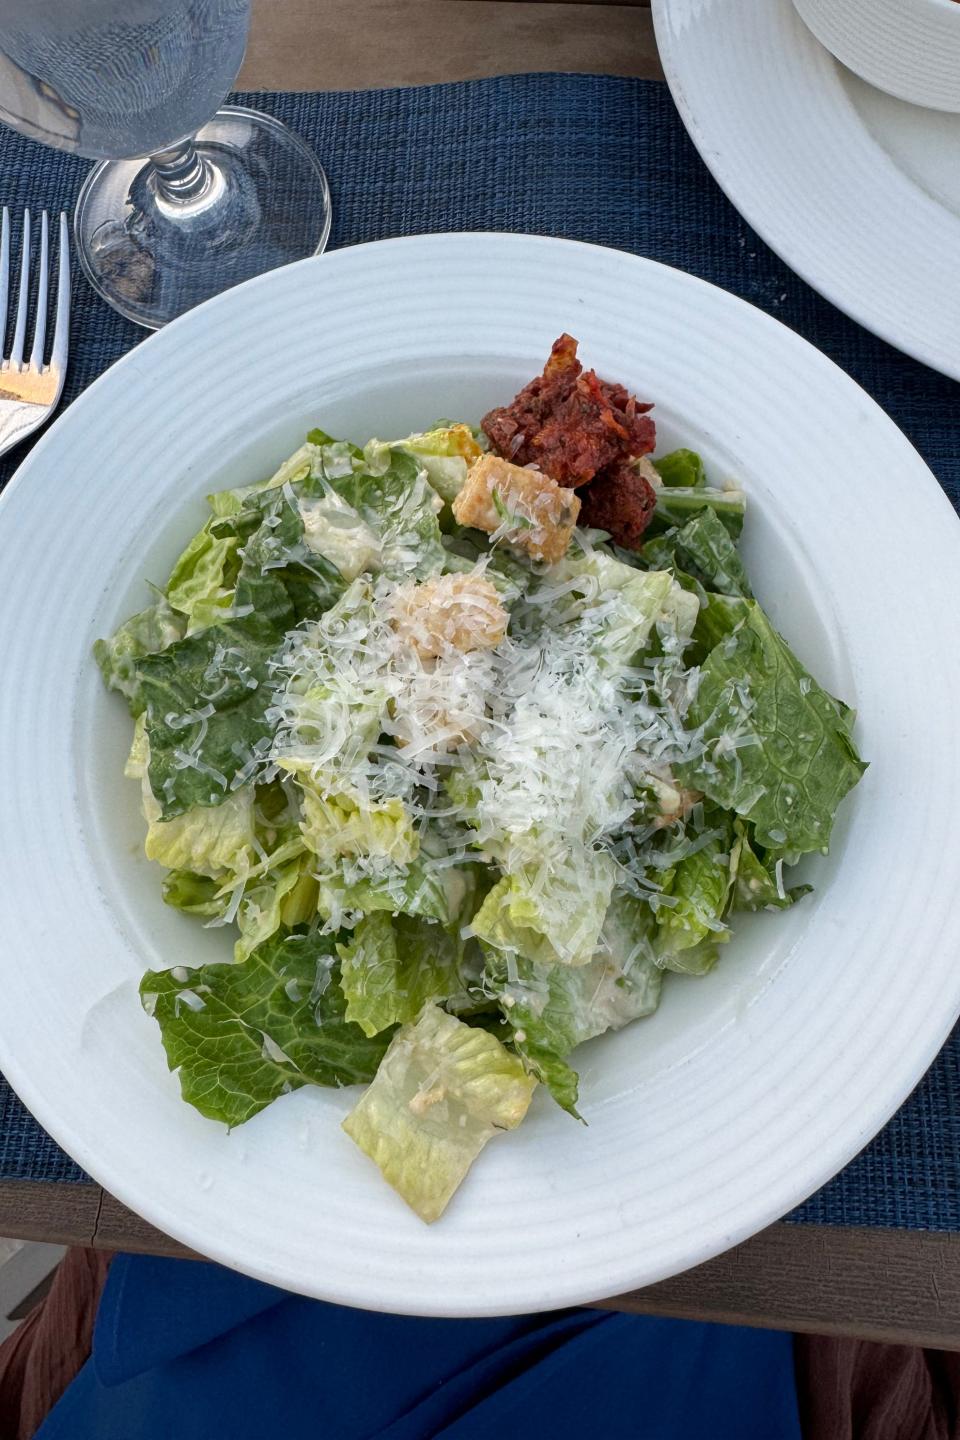 A Caesar salad with shredded cheese and croutons on a plate, at an outdoor dining setting